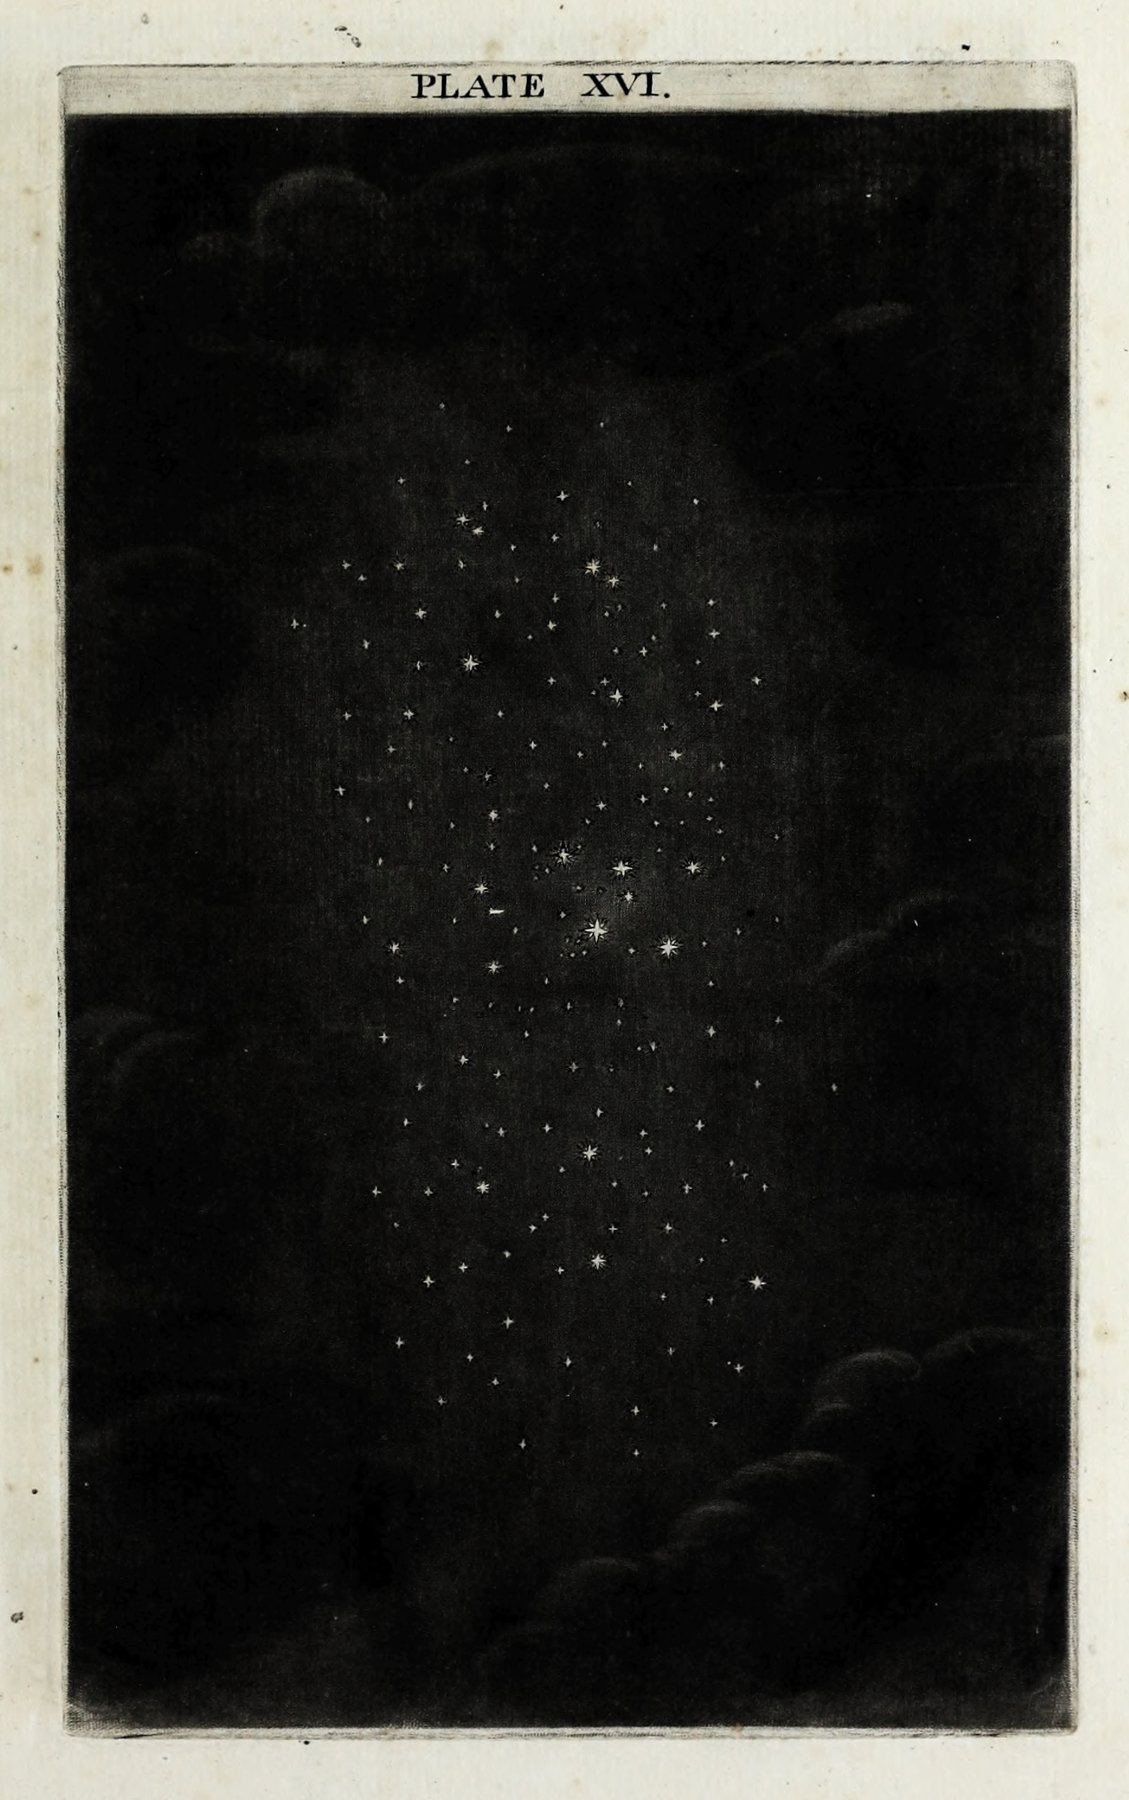 An original theory or new hypothesis of the universe, Plate XVI (1750)